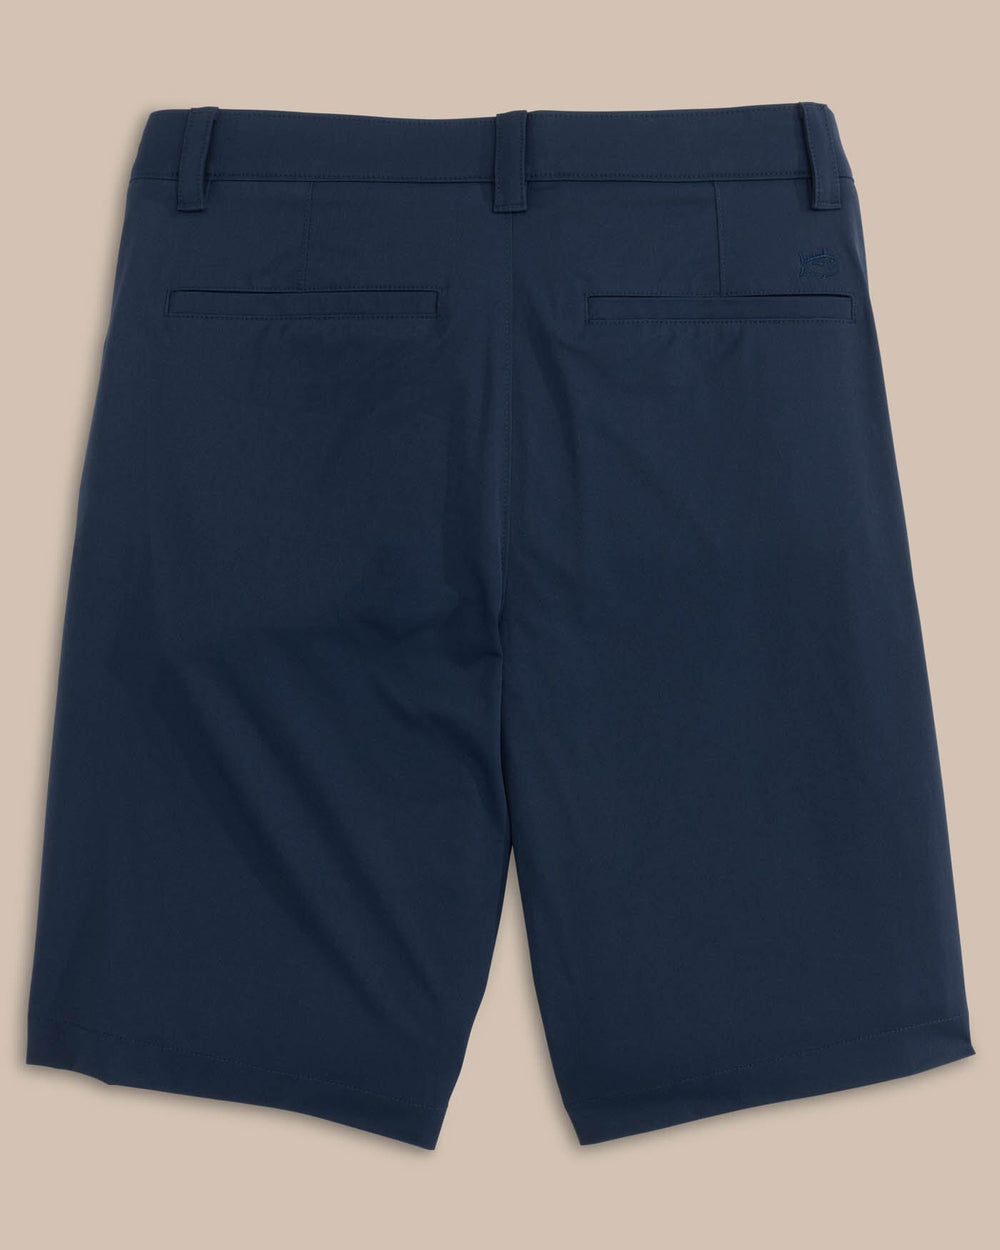 The back view of the Southern Tide brrr die 10 Short by Southern Tide - True Navy